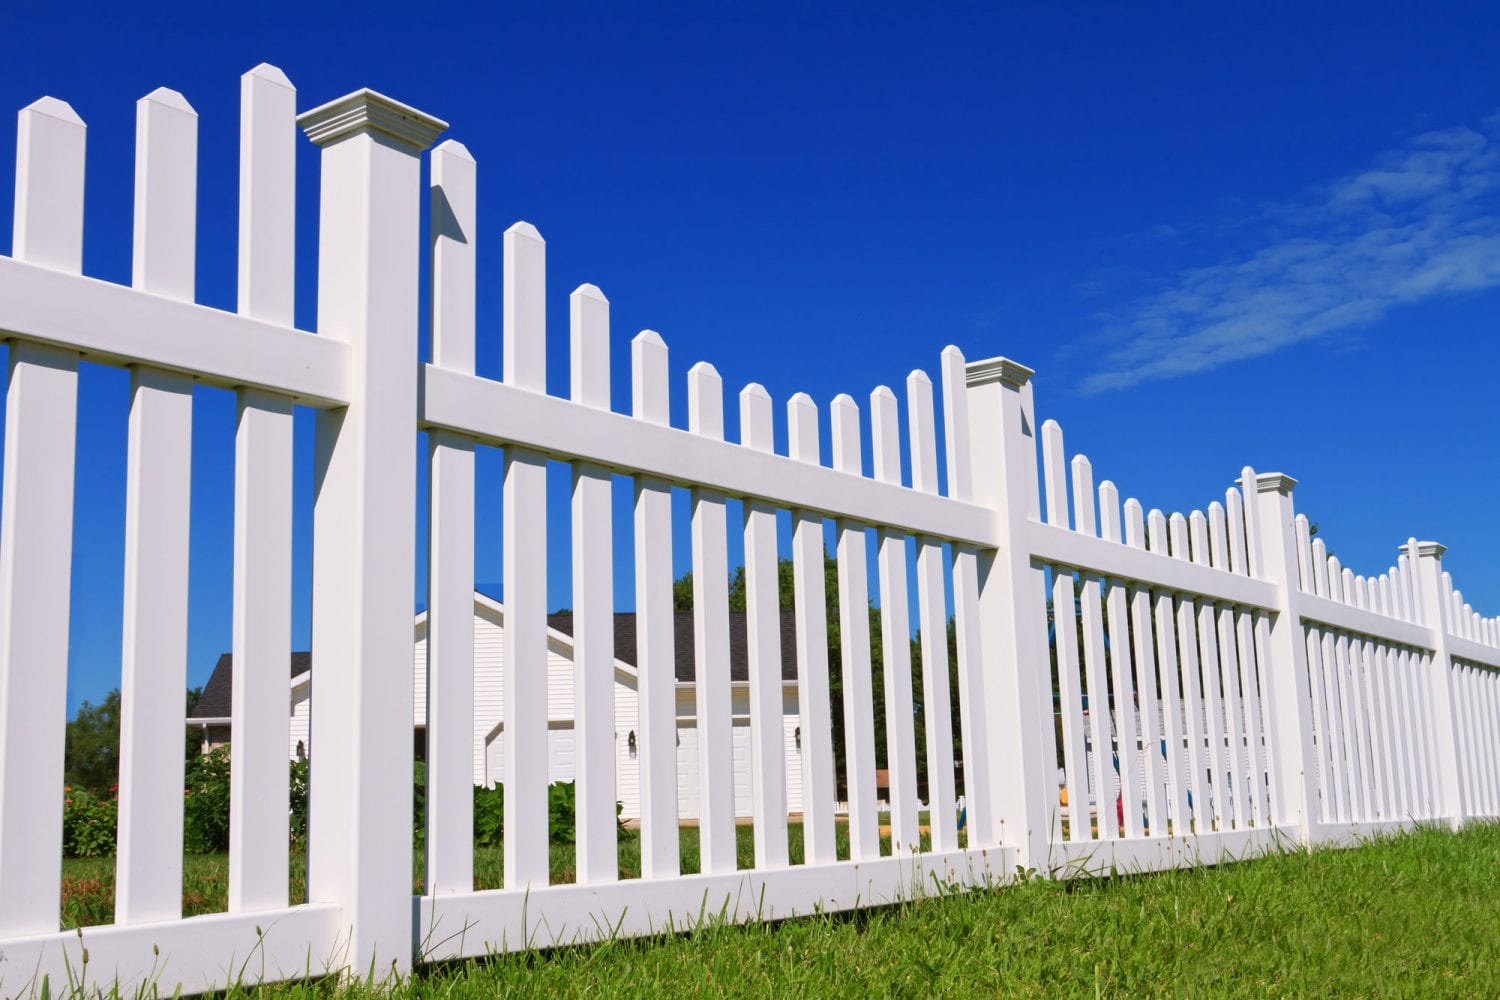 Image of a White Fence